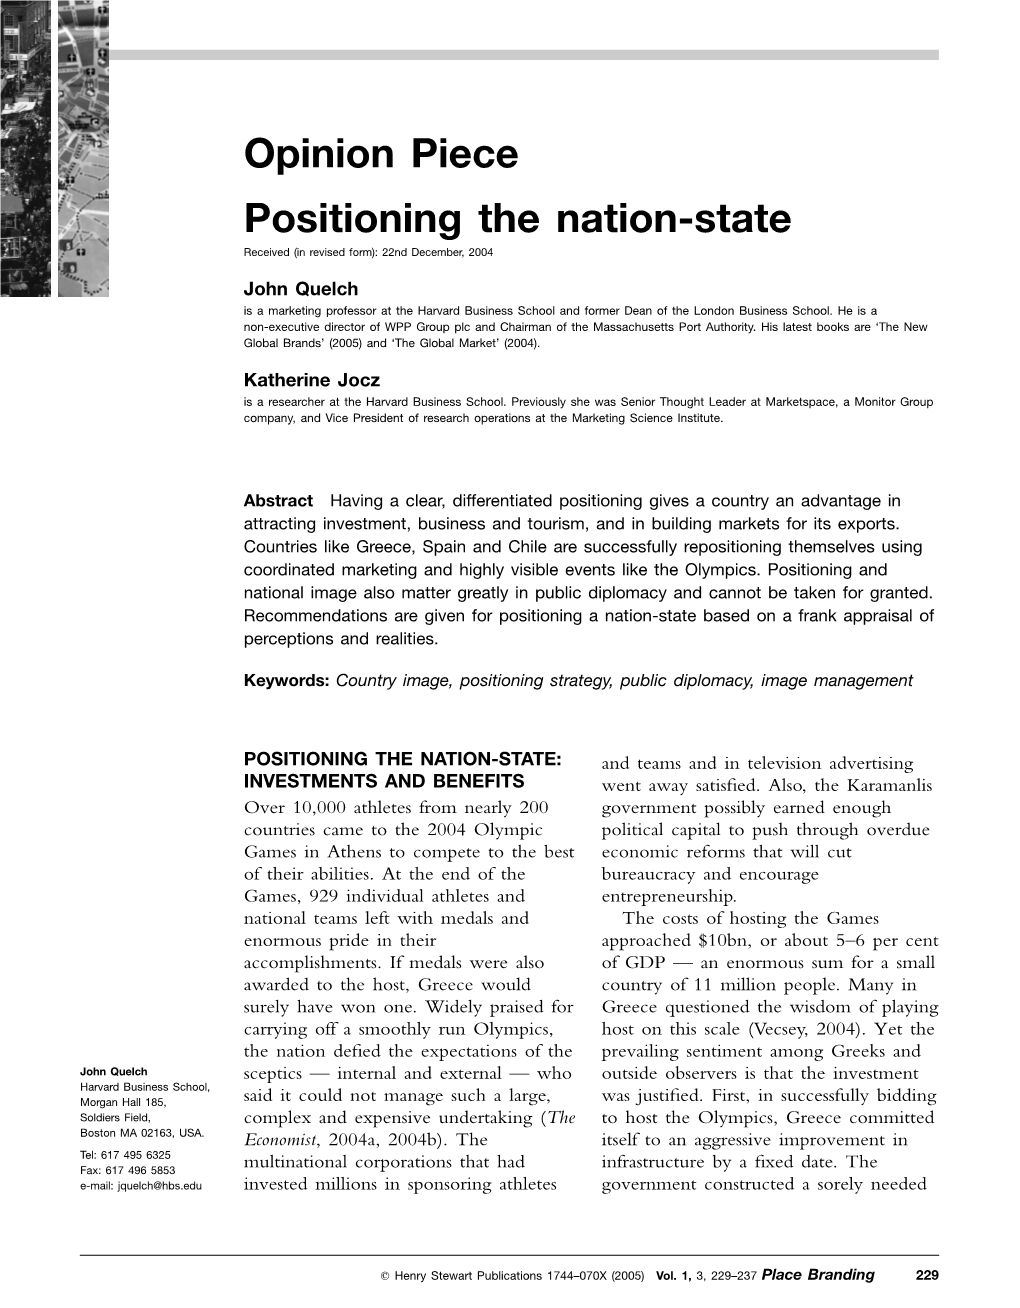 Positioning the Nation State